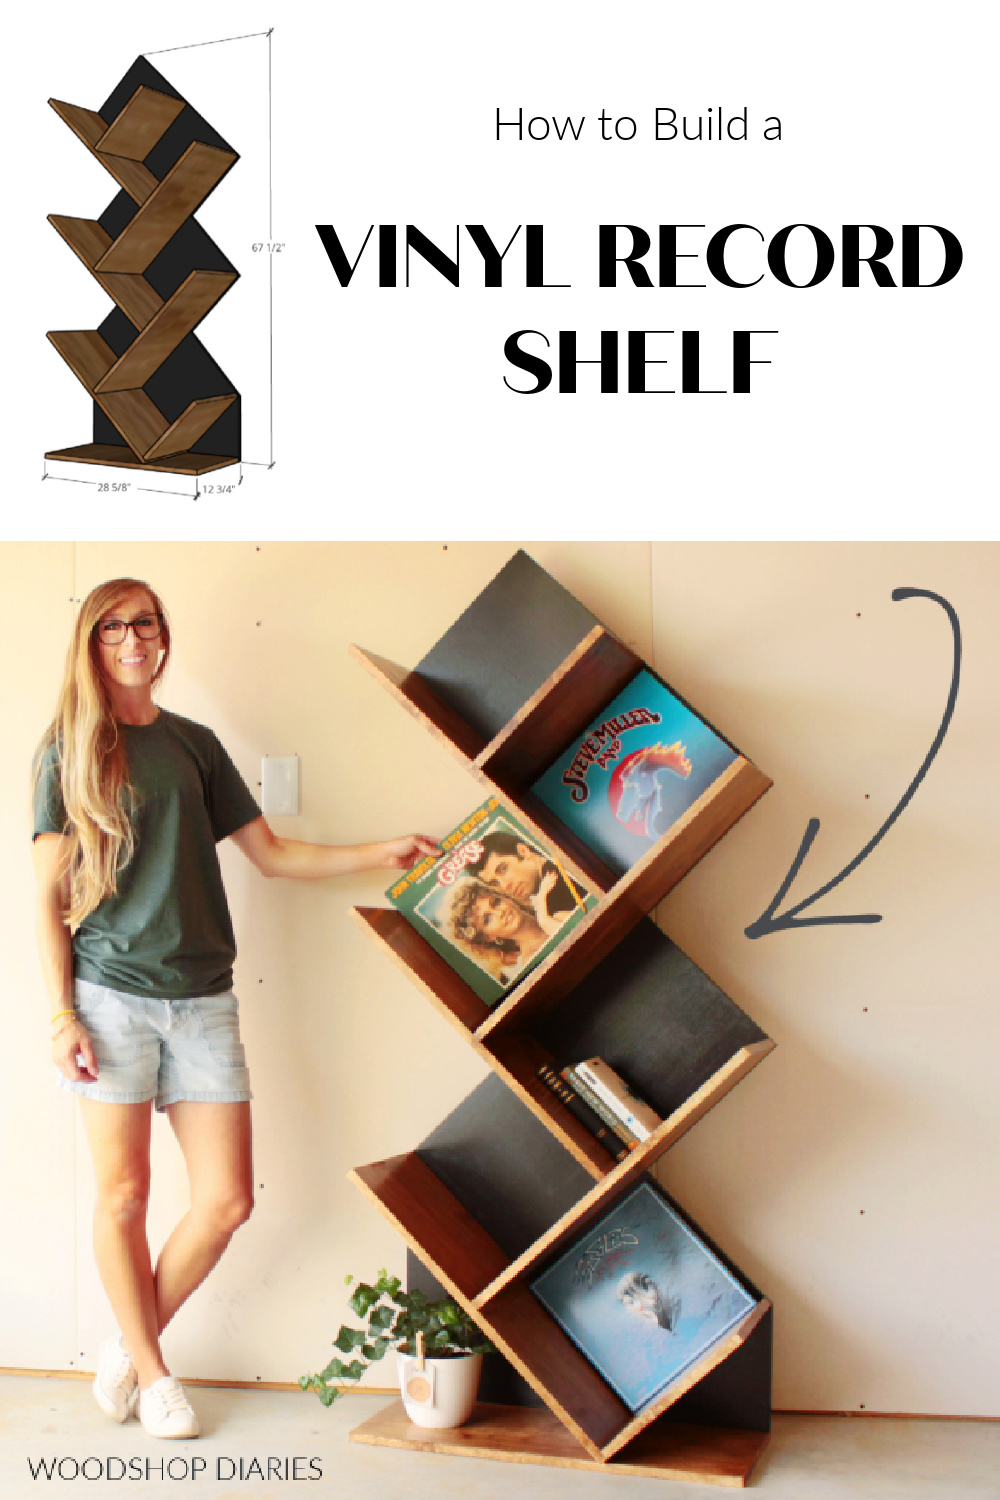 Pinterest collage showing Shara Woodshop Diaries with Vinyl record shelf at bottom and a dimensional graphic at top with text "How to build a vinyl record shelf"